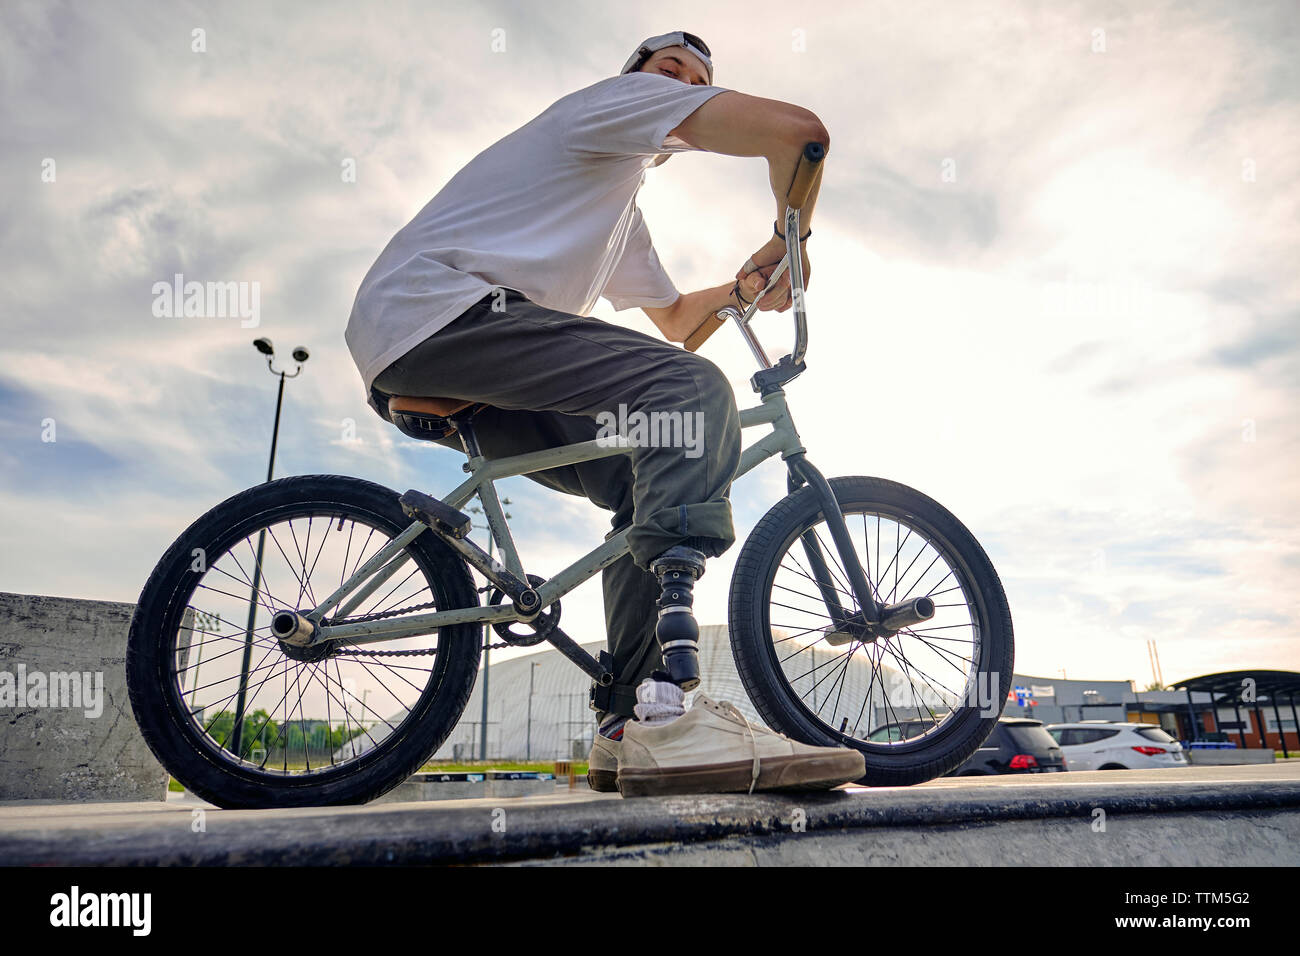 BMX rider with prosthetic foot confidently posing on bike against cloudy sky at skateboard park Stock Photo